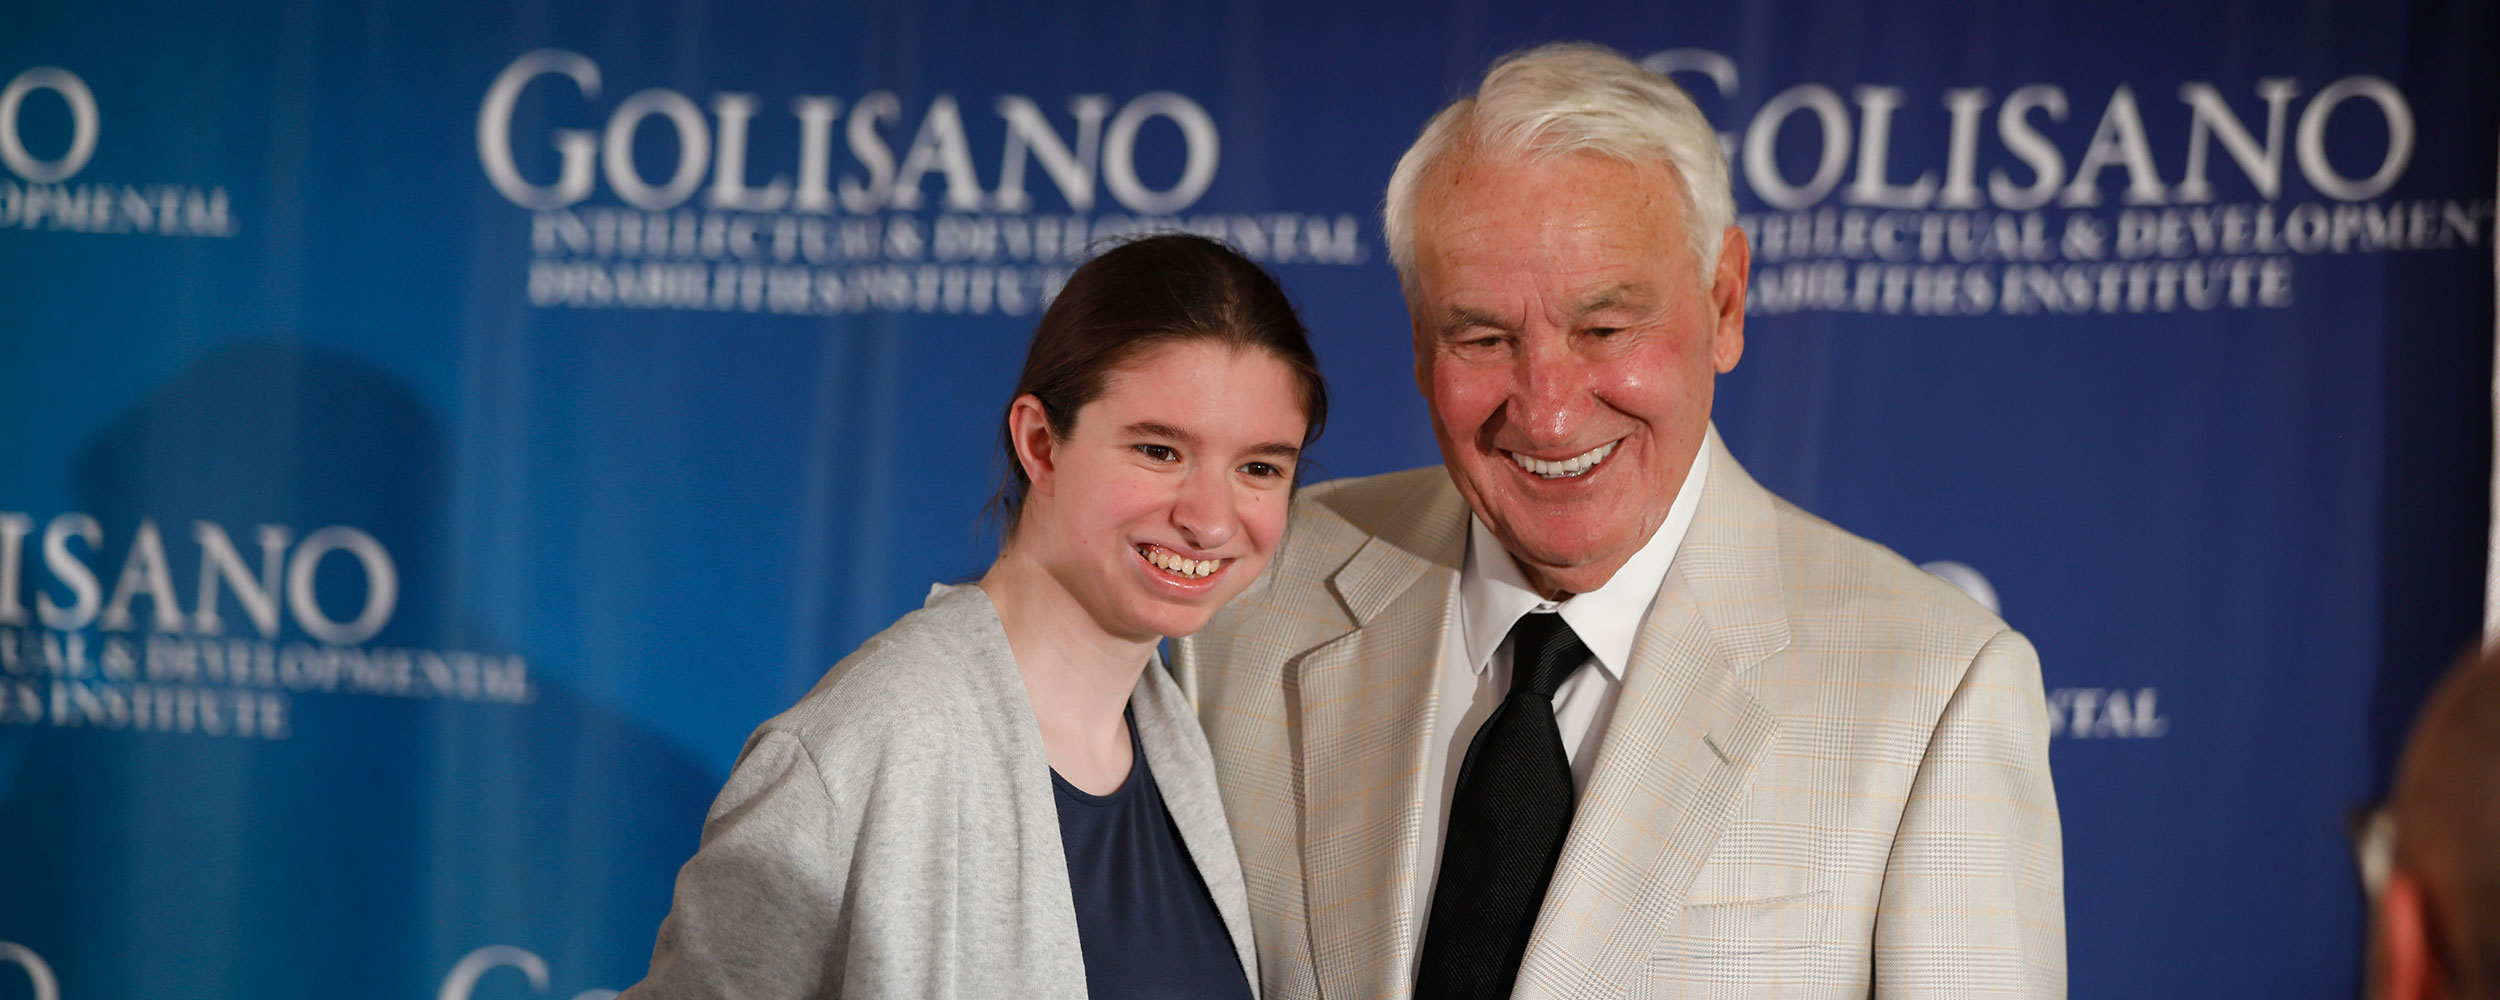 Tom Golisano poses for a picture with Shannon Salluzzo, 19, of Penfield, New York.